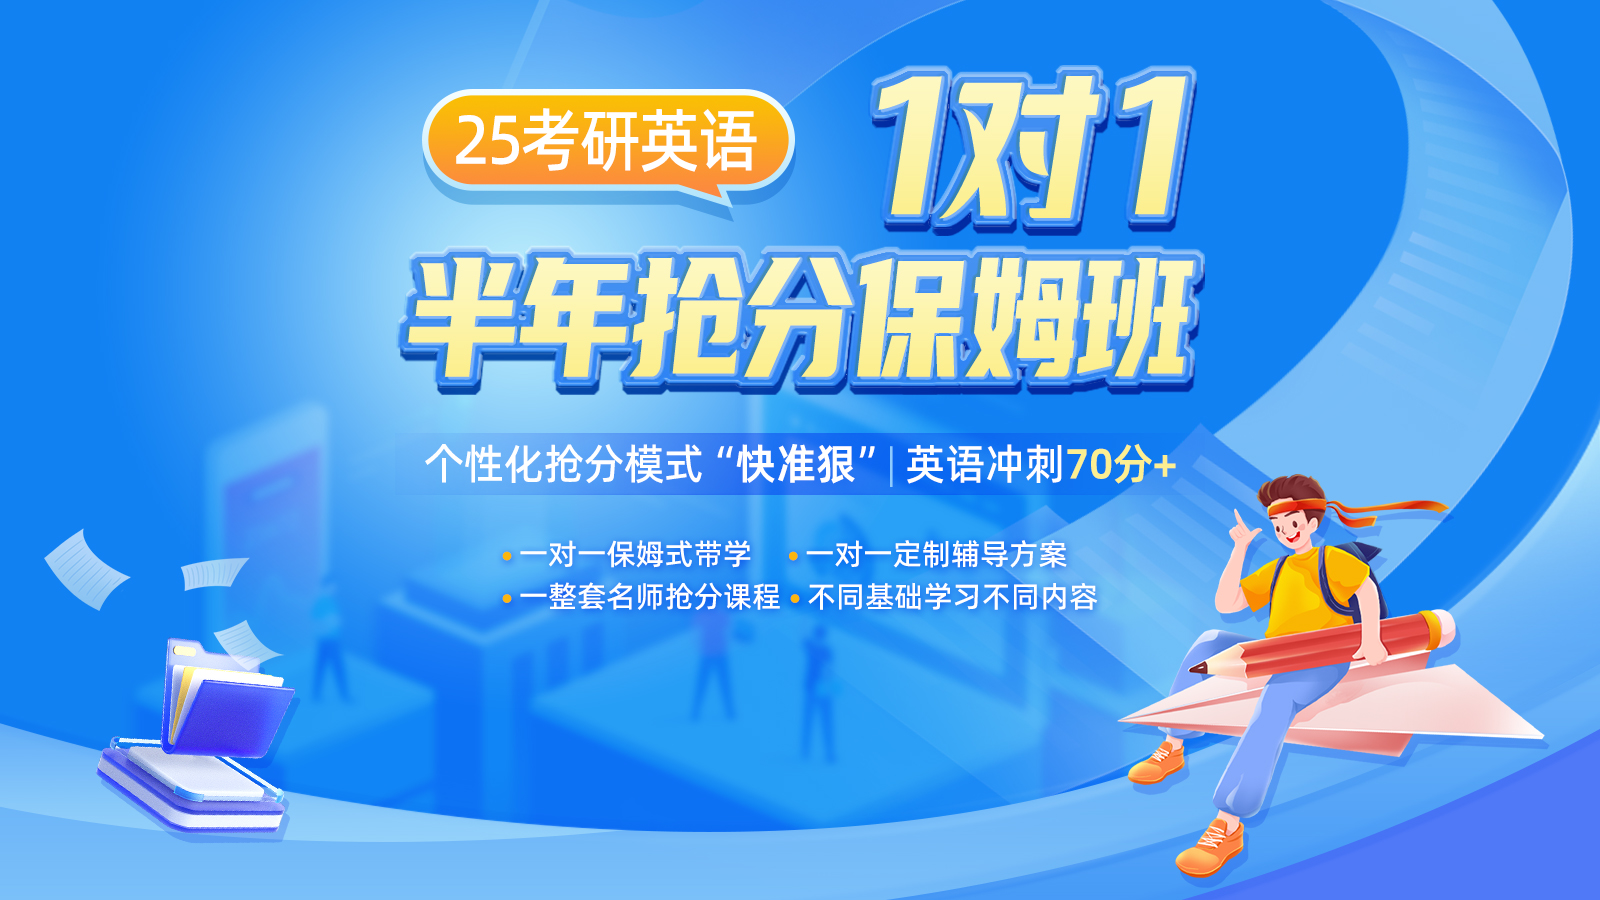 http://www.chaojikaoyan.com//filesys/index_banner/poster_pc/43fc291311dfc9473075779ab3751355.jpg